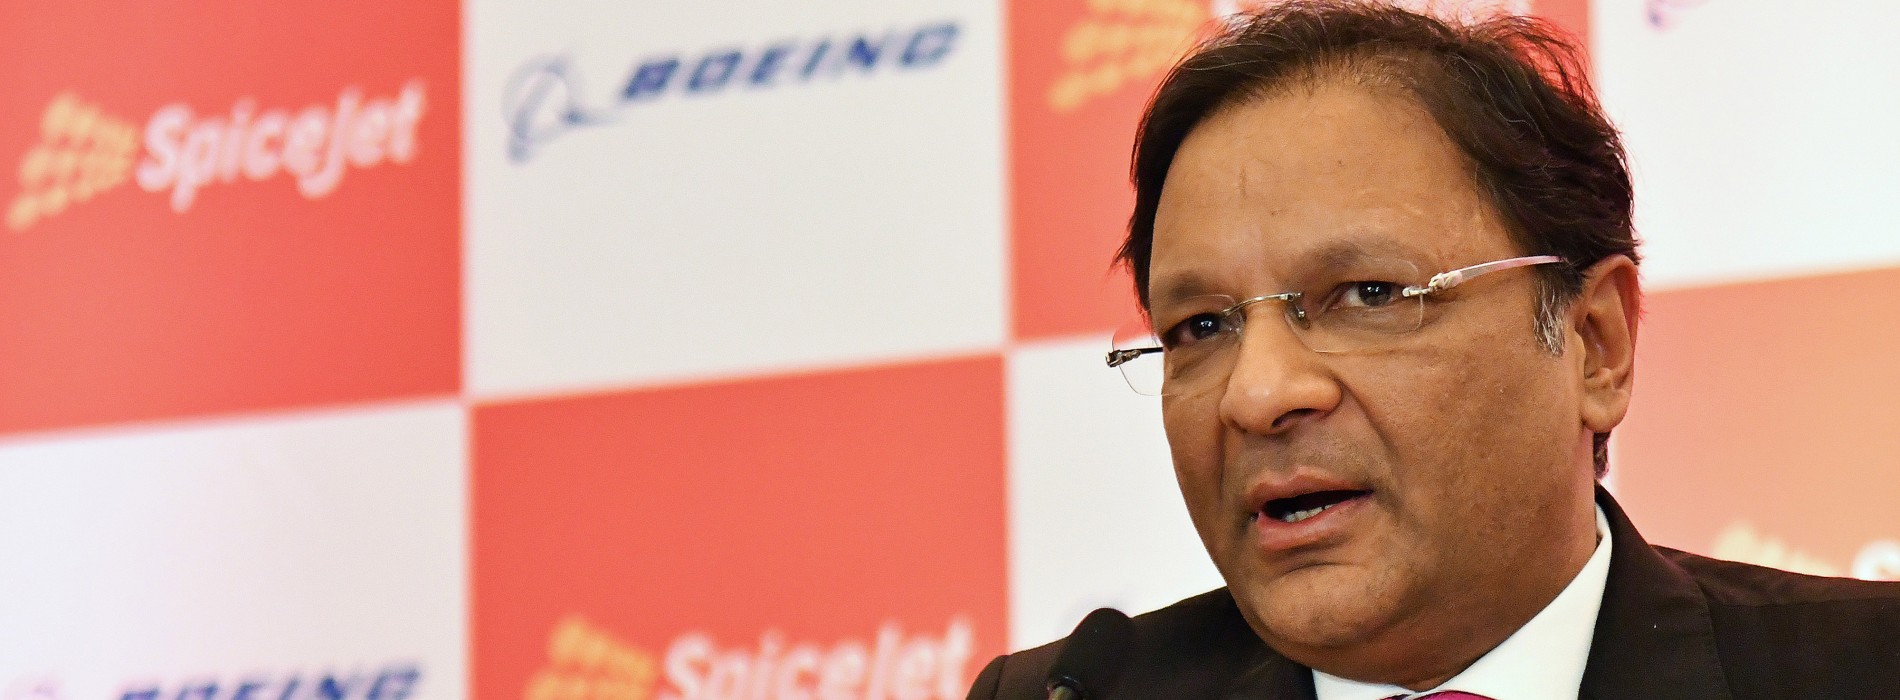 Spicejet CMD calls for cut in taxes on jet fuel to boost growth